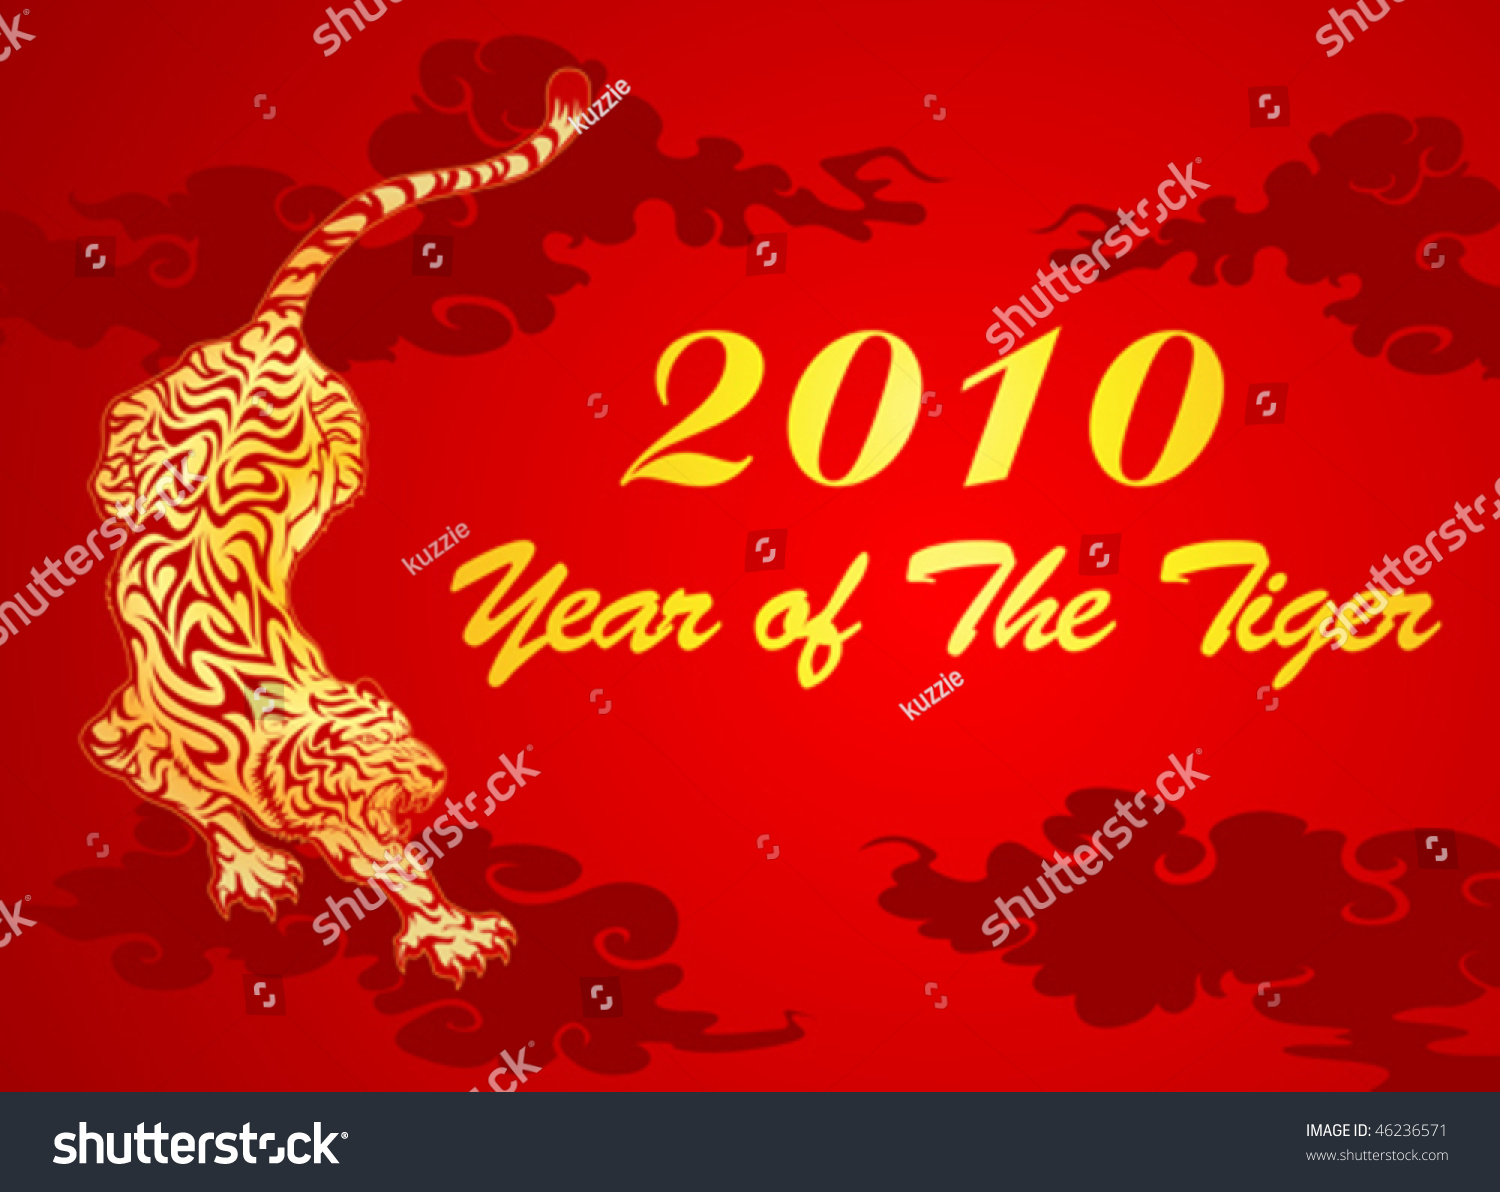 Illustration of year of the tiger #46236571